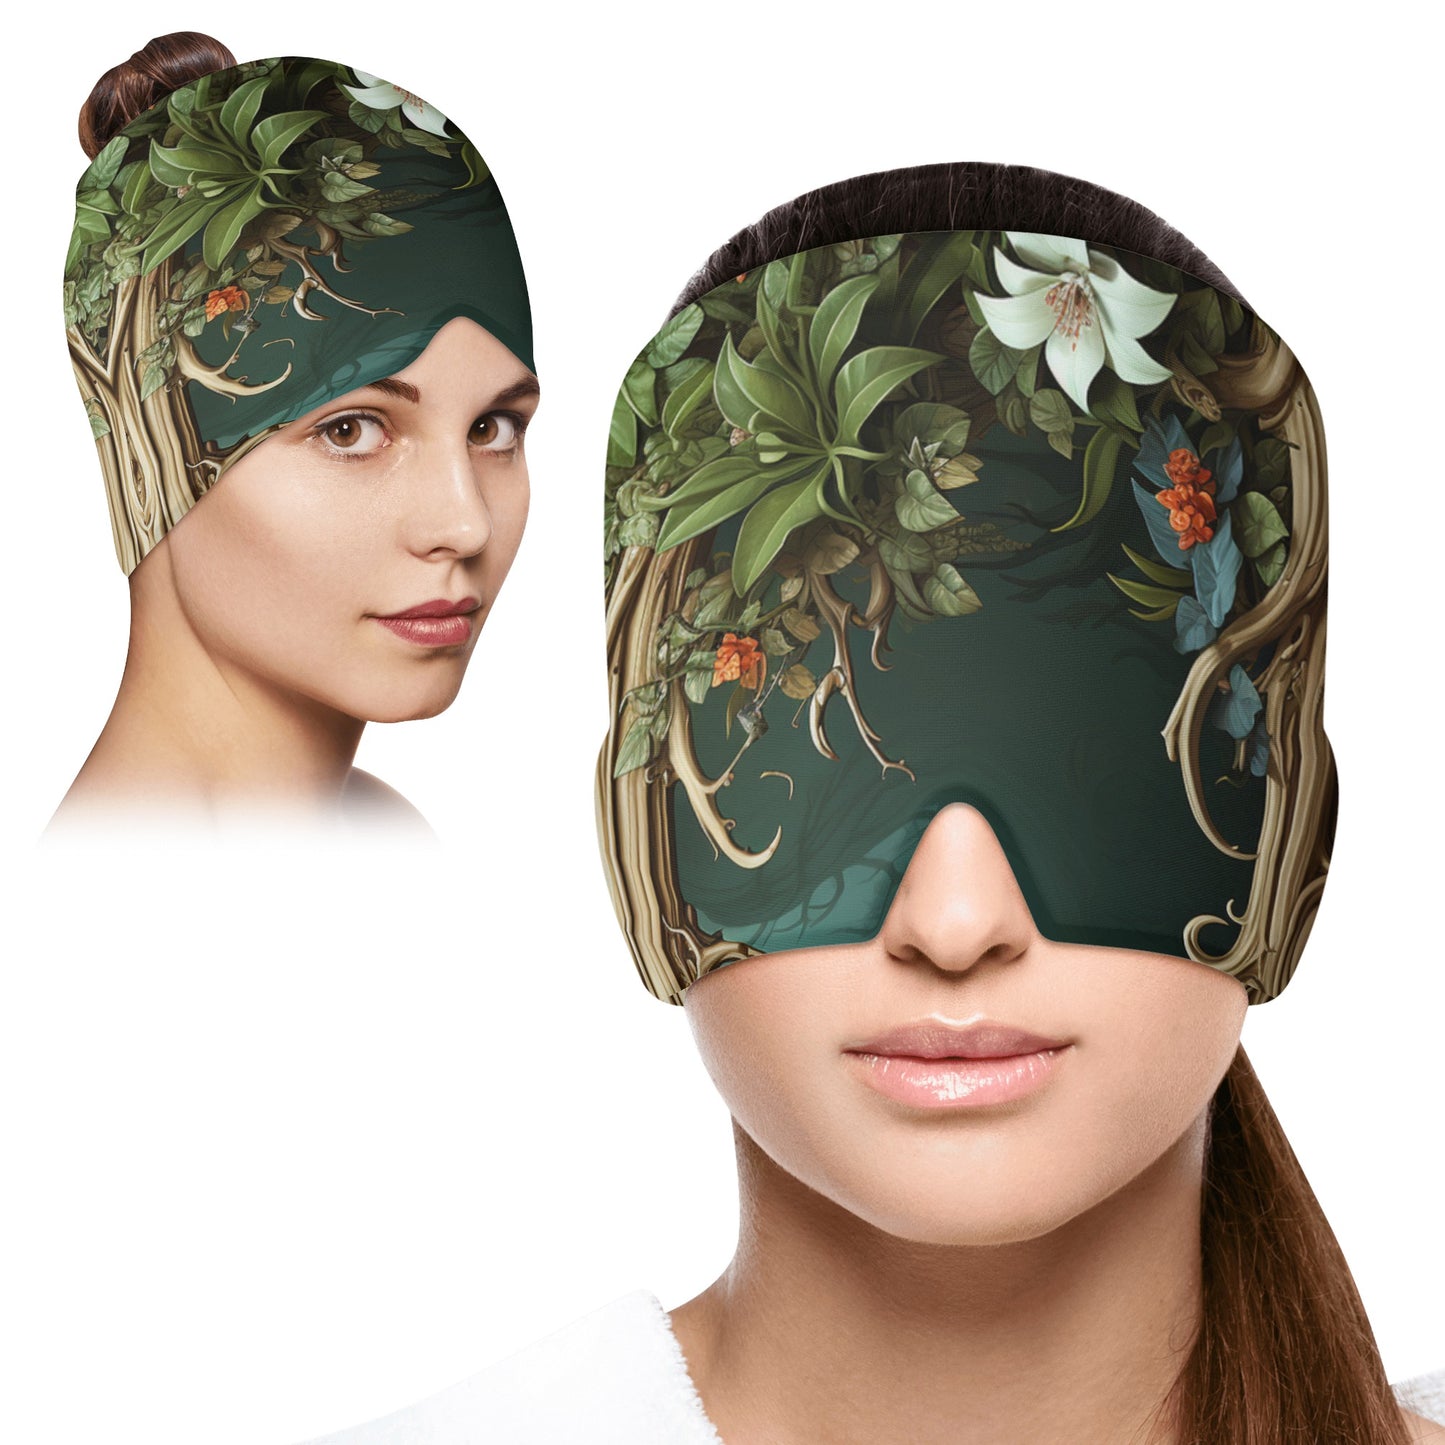 Neduz Designs Artified Collection - Leaves and Twigs Ice Head Wrap